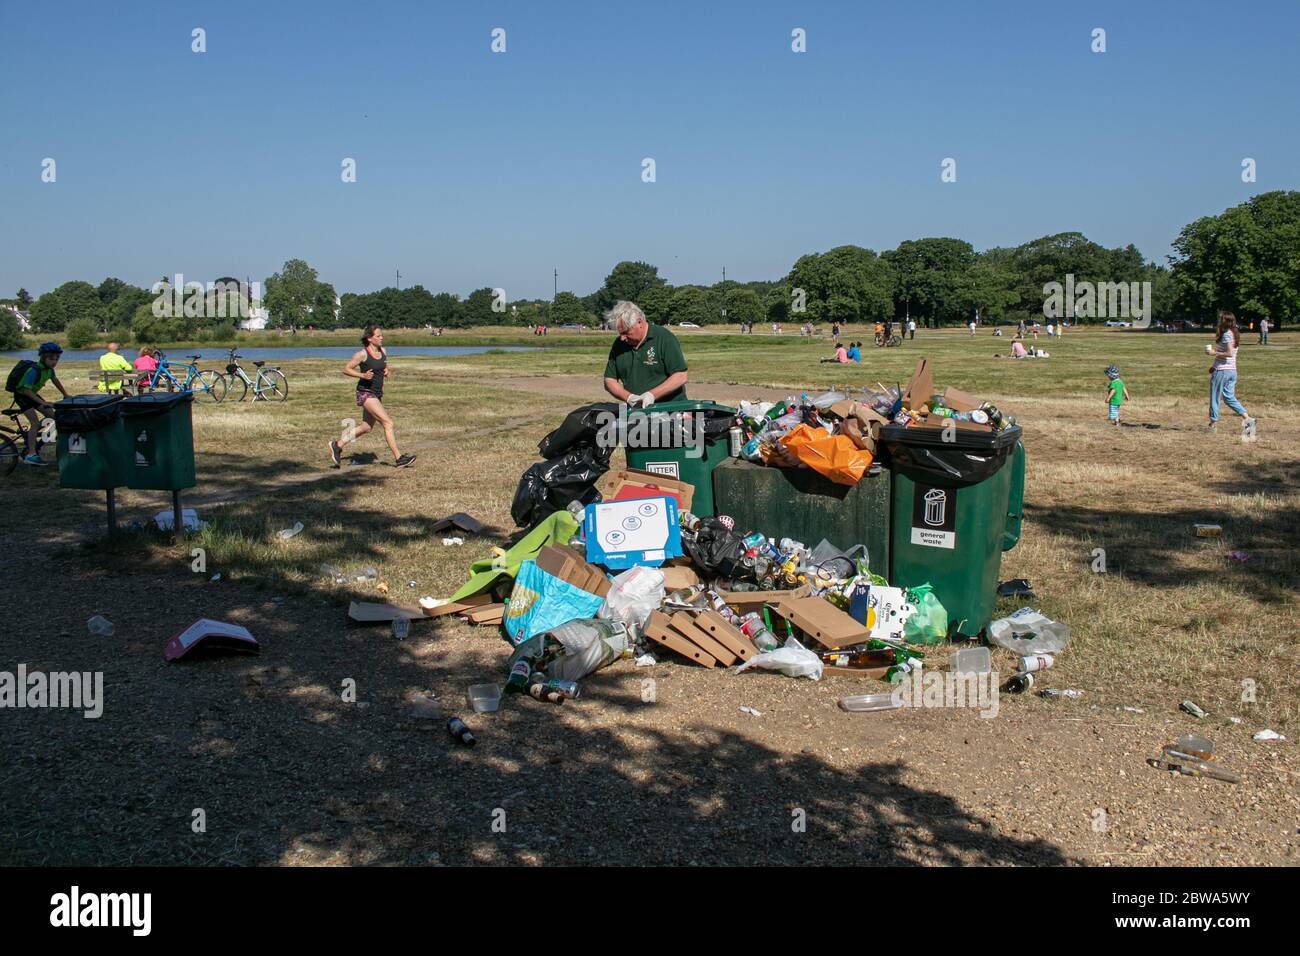 WIMBLEDON LONDON, UK. 31 May 2020. Large piles of rubbish are discarded by members of the public on Wimbledon Common as lockdown restricitons are eased. The government has started to ease the lockdown restrictions and announced that  groups of up to six people will be able to meet outdoors in England from Monday 1 June, provided strict social distancing guidelines are followed. Credit: amer ghazzal/Alamy Live News Stock Photo